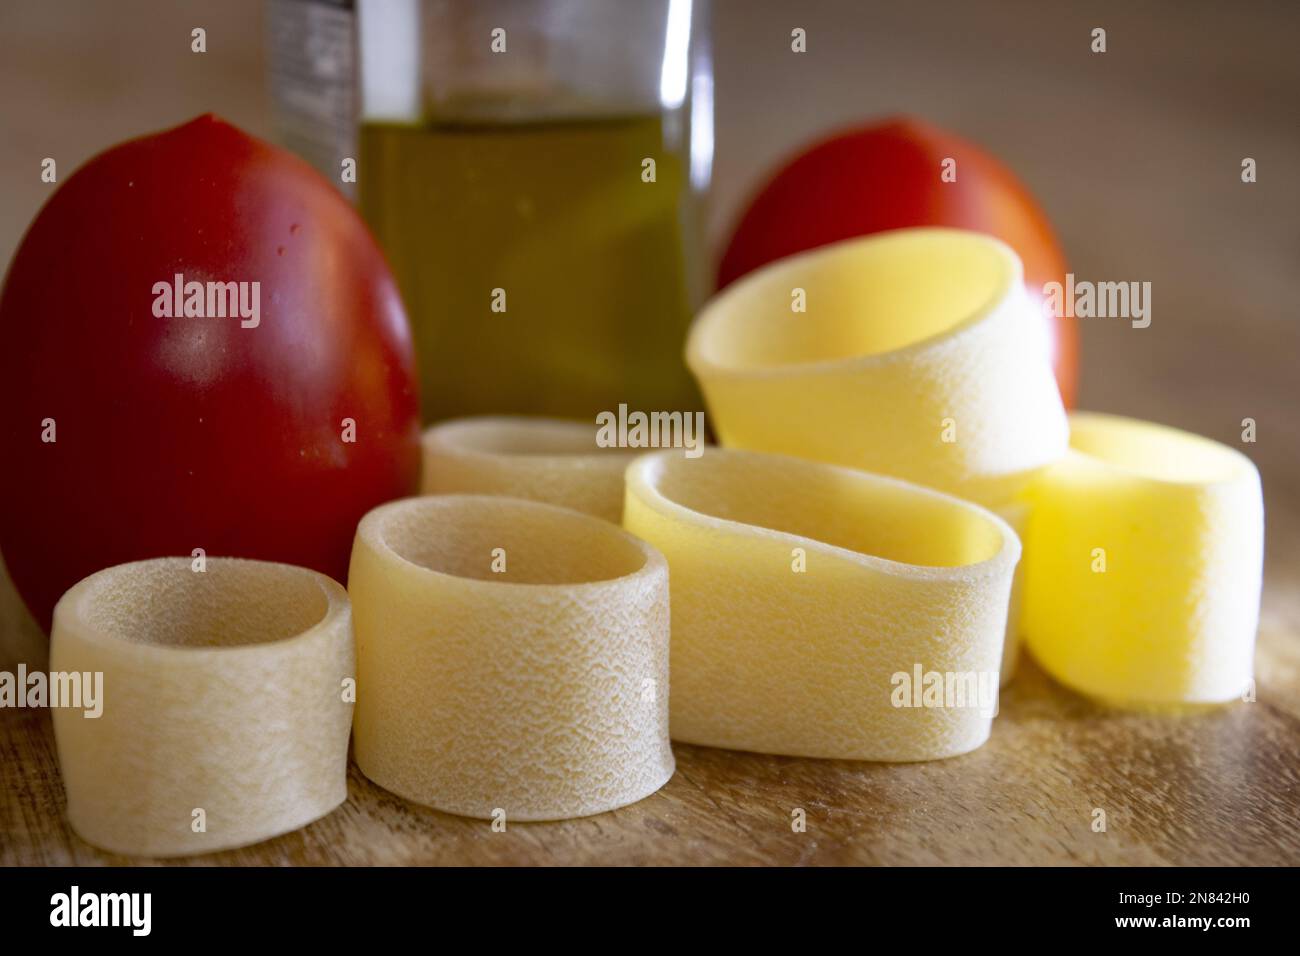 ingredients to prepare pasta with olive oil and tomato sauce Stock Photo